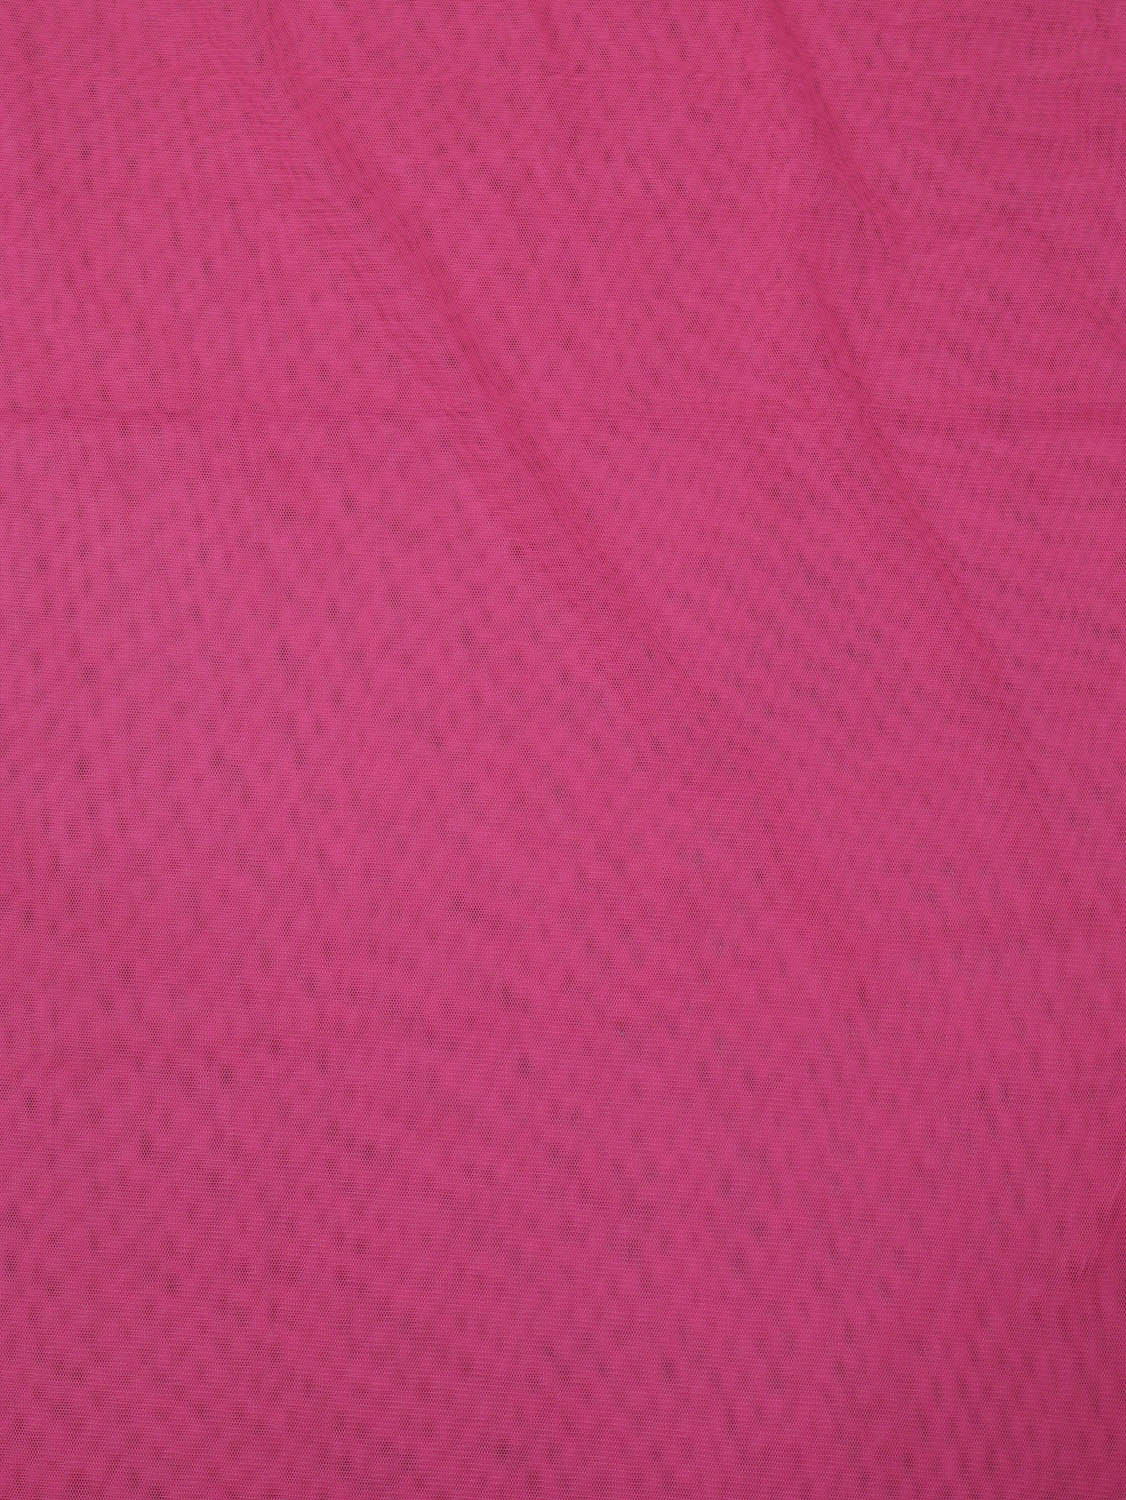 Get Stylish with Pink Trendy Net Fabric - 1 Mtr Length - Luxurion World